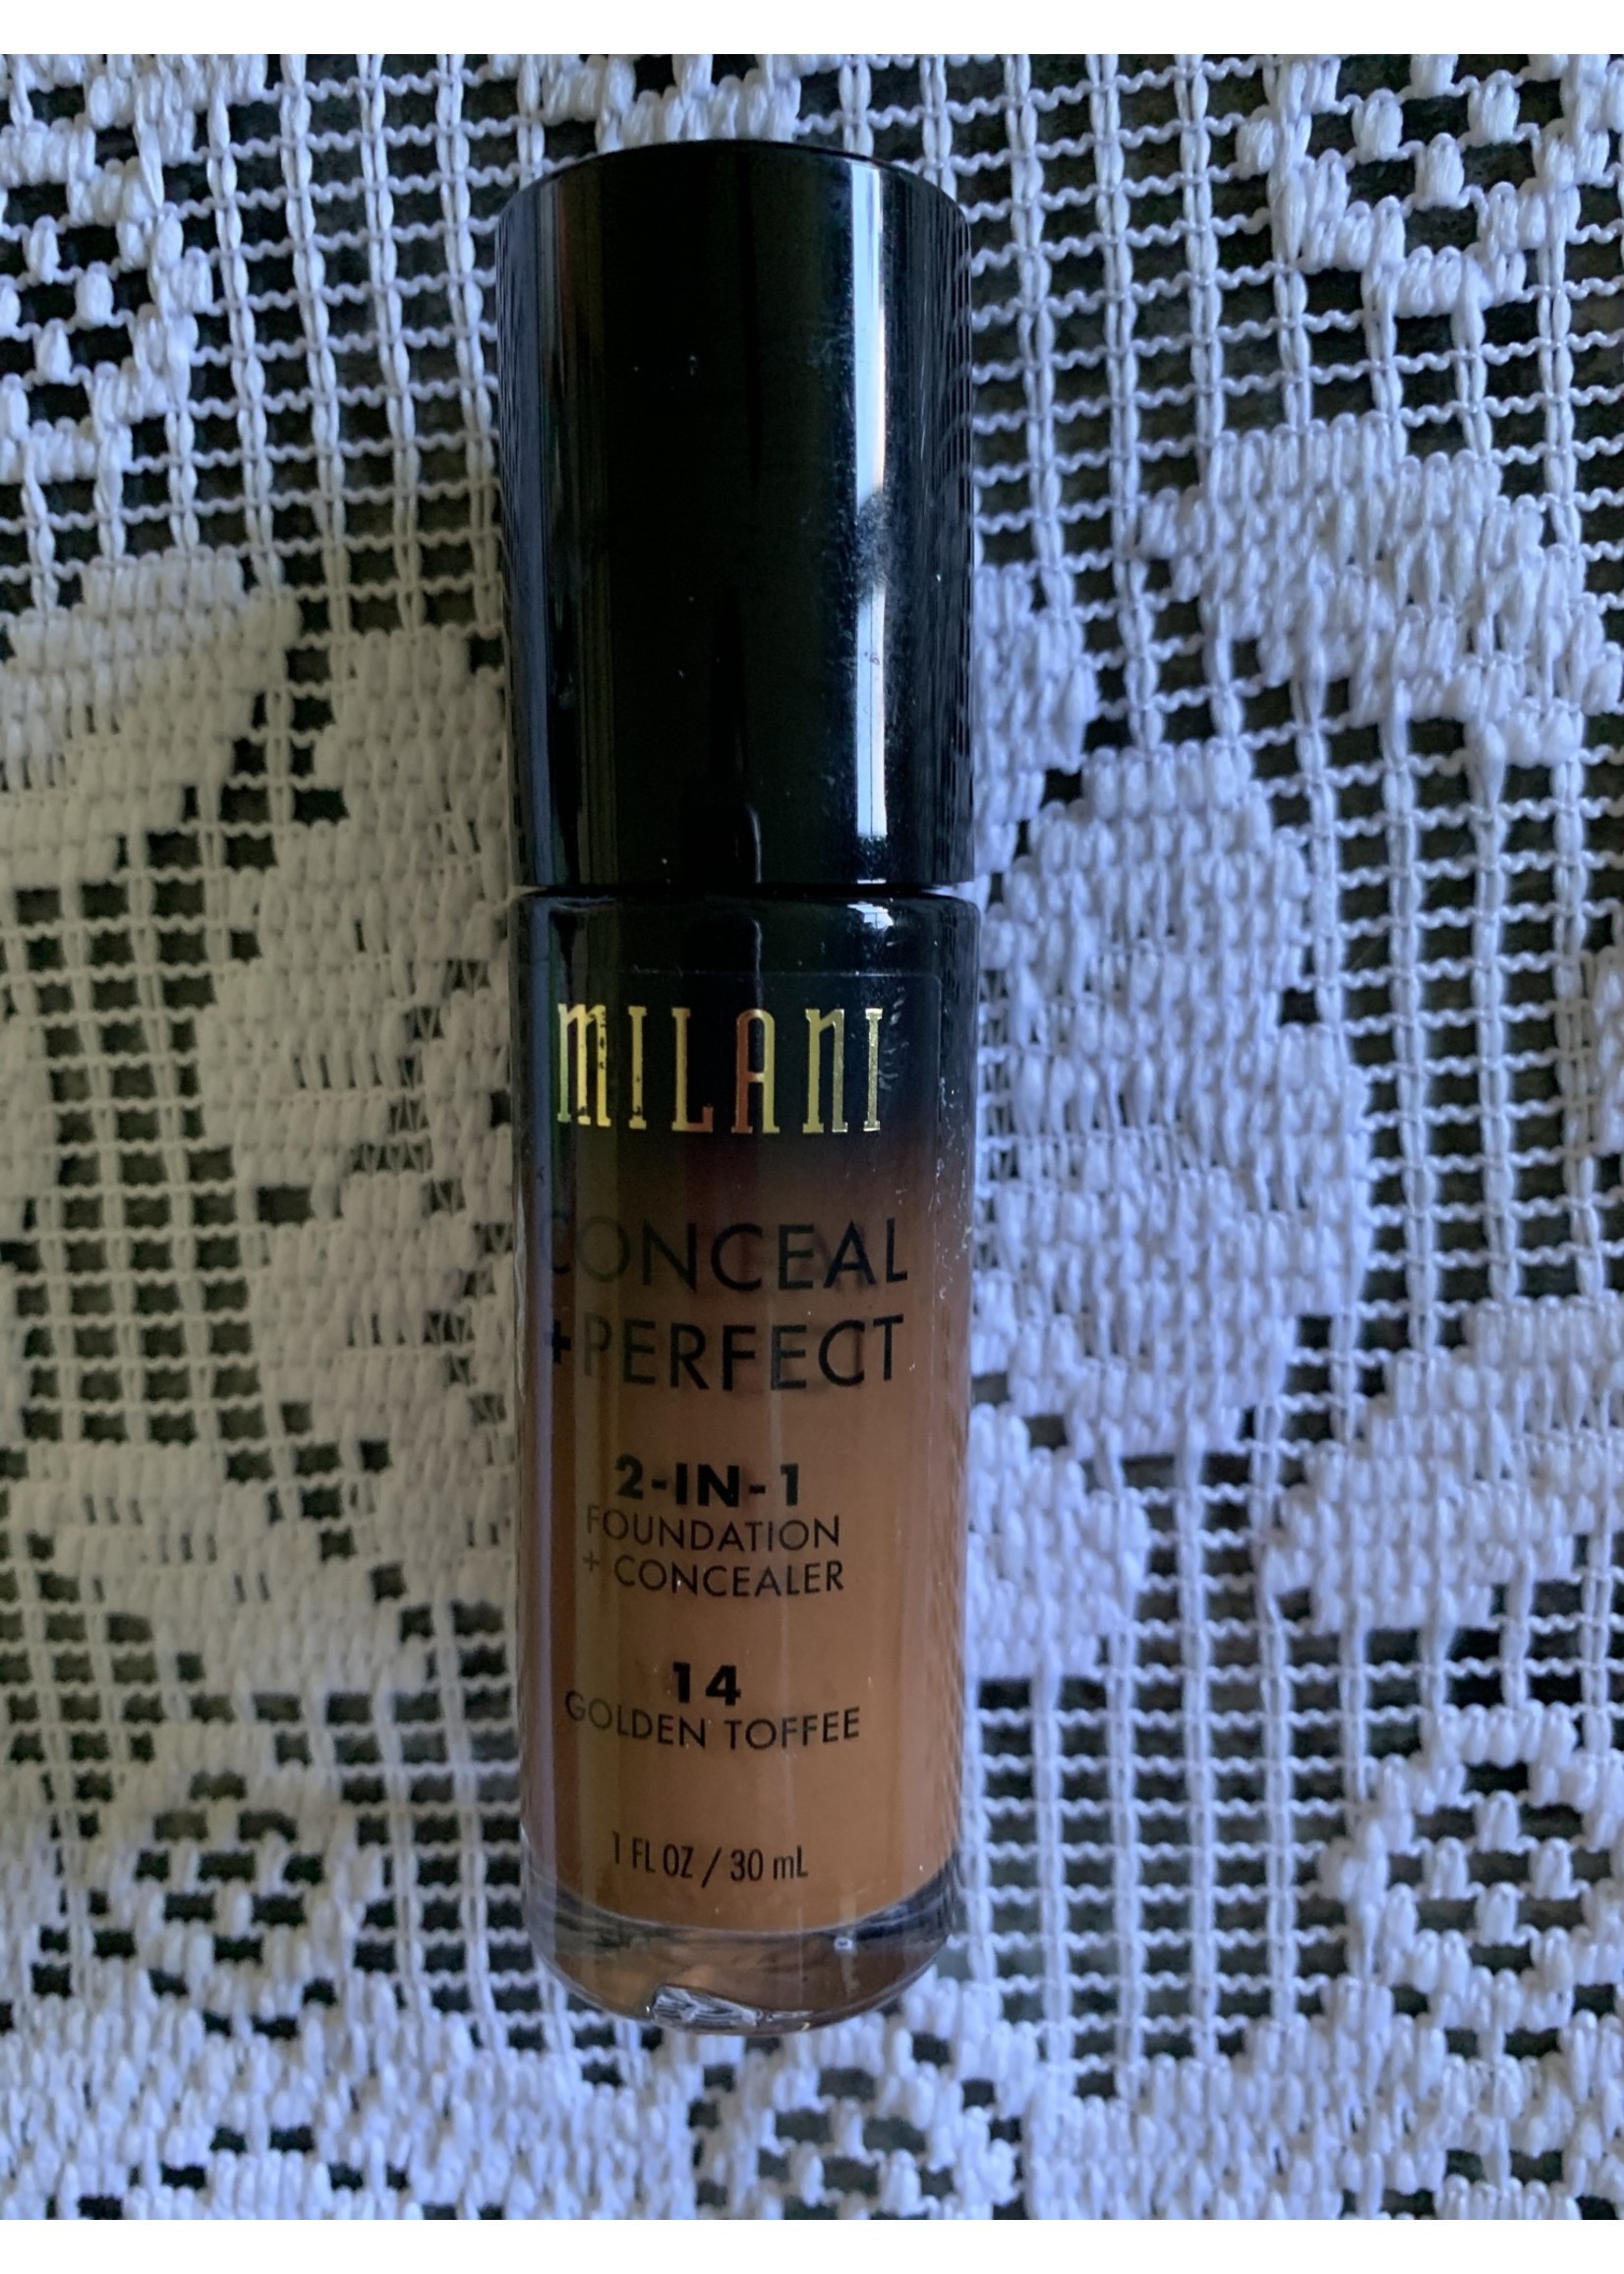 Milani Milani Conceal + Perfect 2-in-1 Foundation + Concealer - Golden Toffee - 1 fl oz